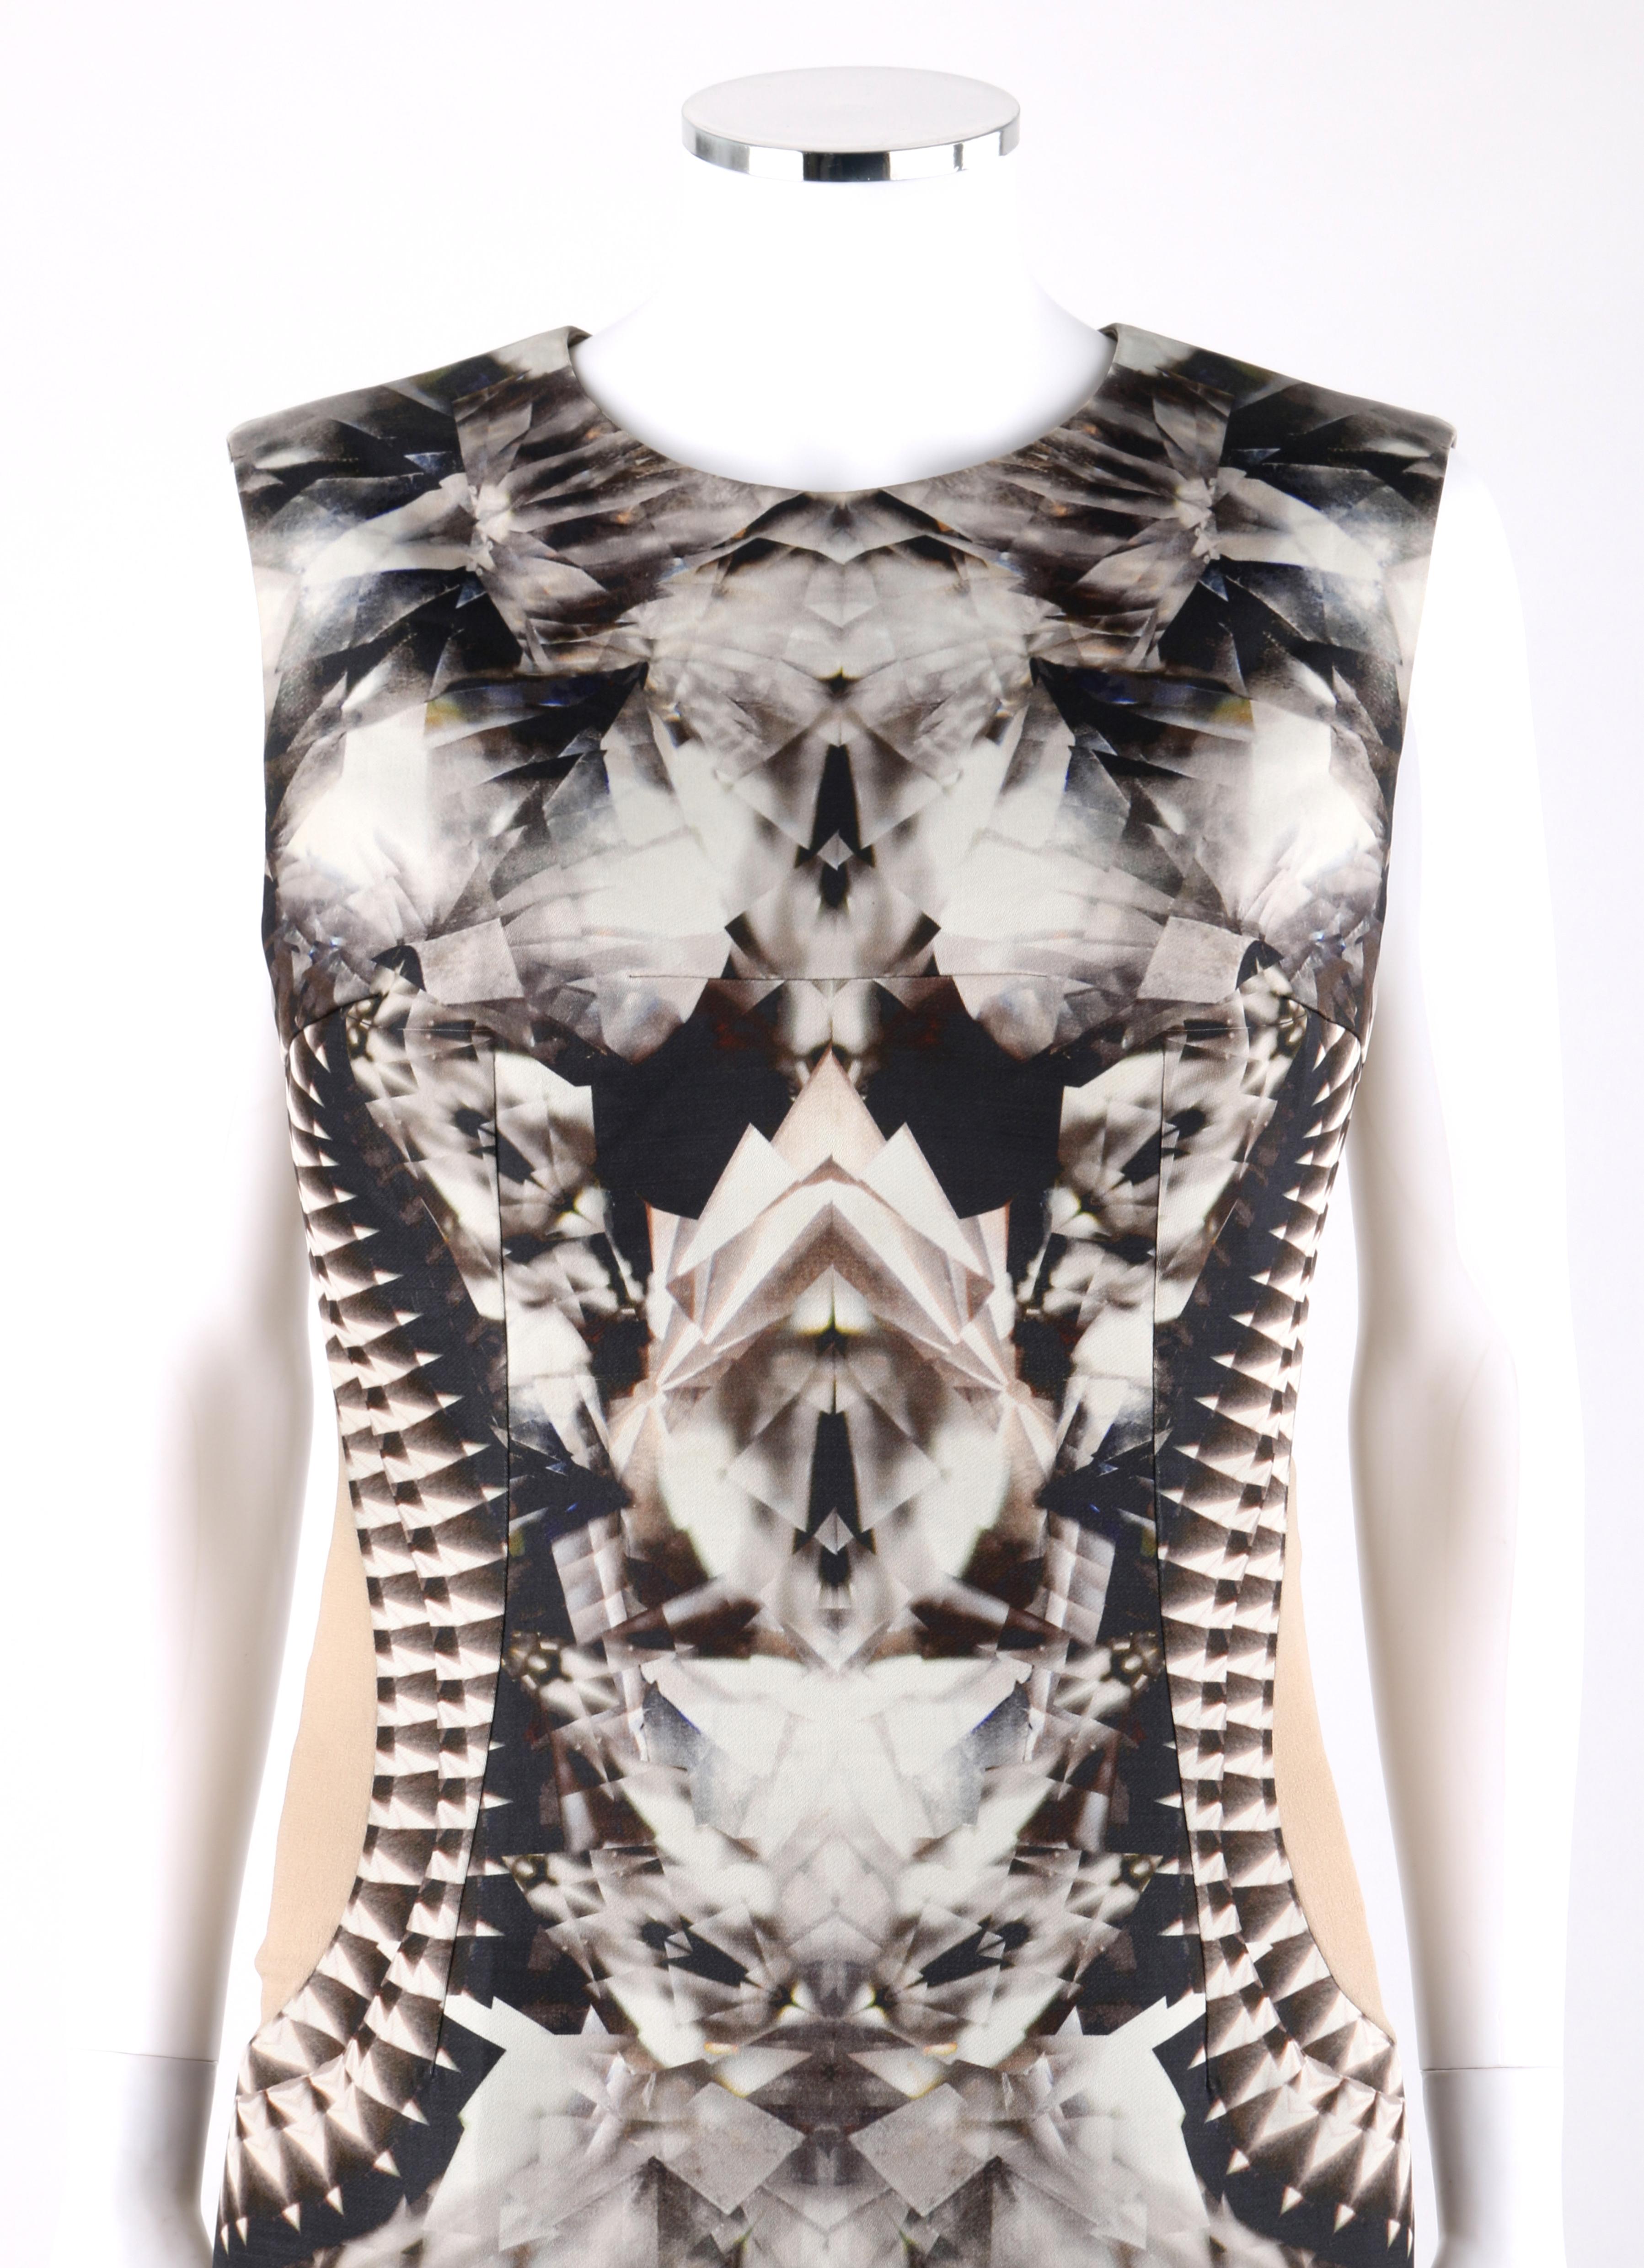 ALEXANDER McQUEEN S/S 2009 Iconic Skeleton Kaleidoscope Print Dress 44 
 
Brand / Manufacturer: Alexander McQueen
Collection: Spring/ Summer 2009 
Style: Sheath dress
Color(s): Shades of grey, black, off white, brown, tan and orange.
Lined: Yes    